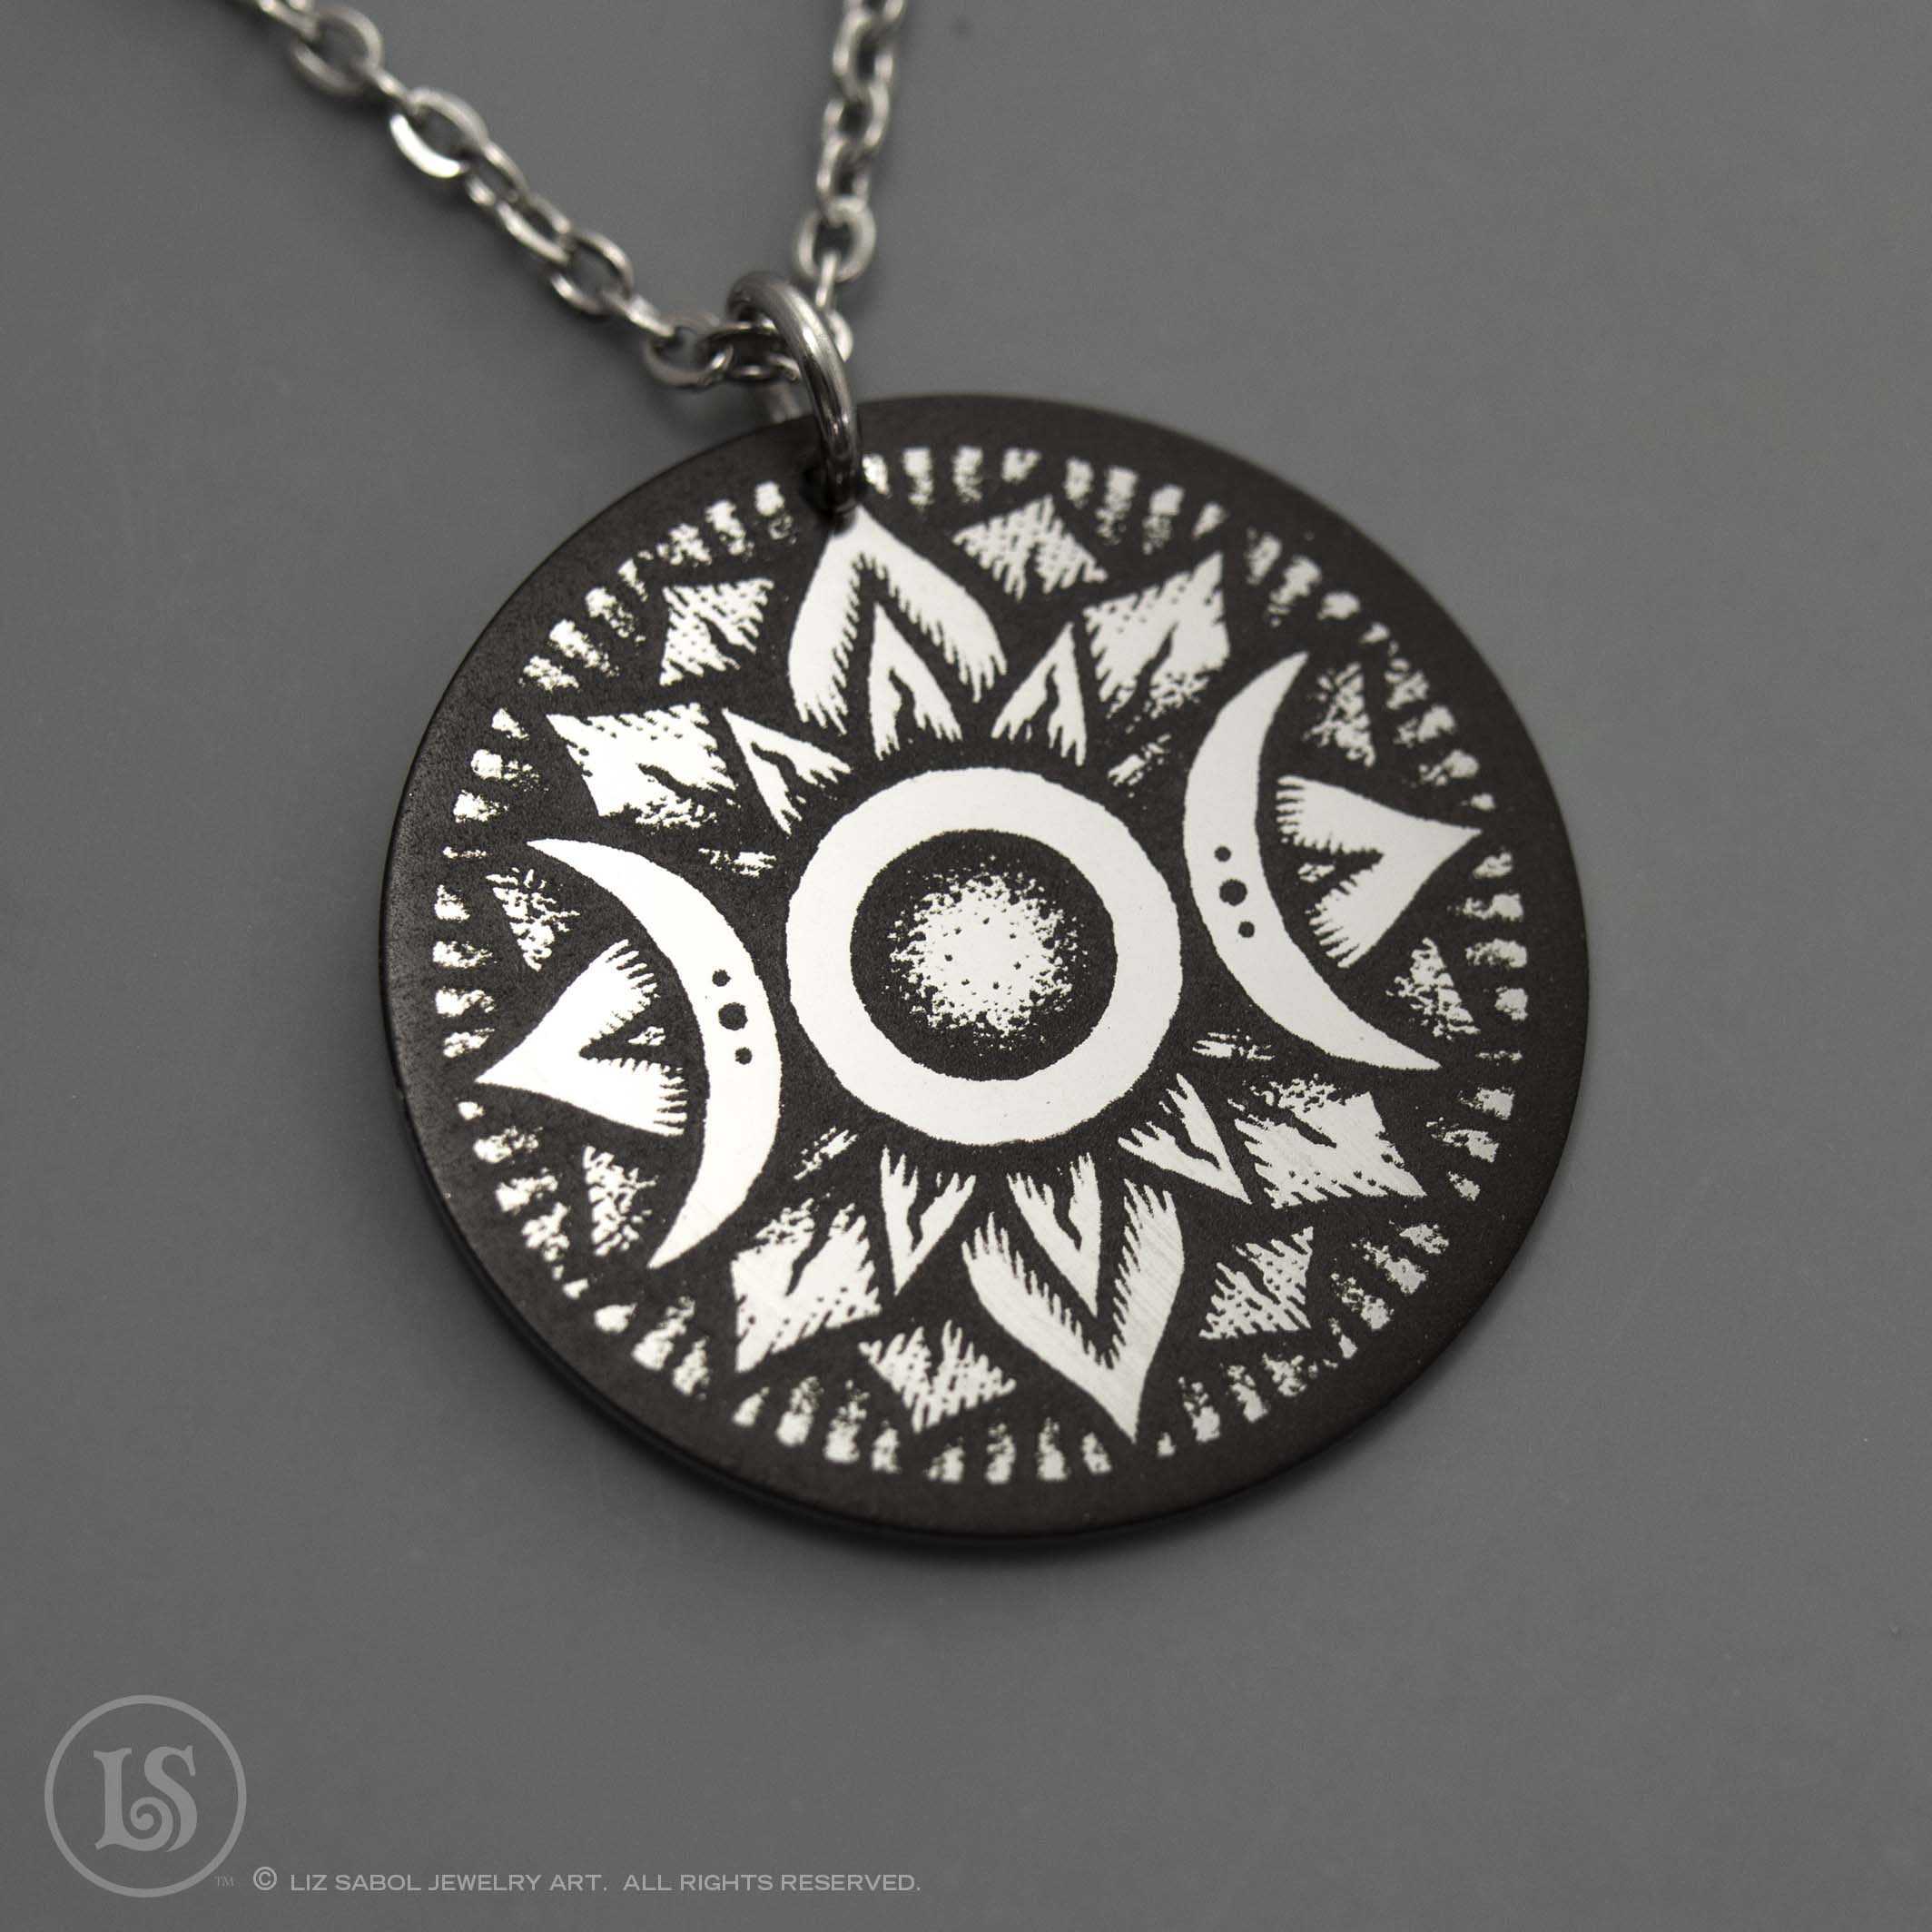 Triple Goddess Etched Pendant, Stainless Steel